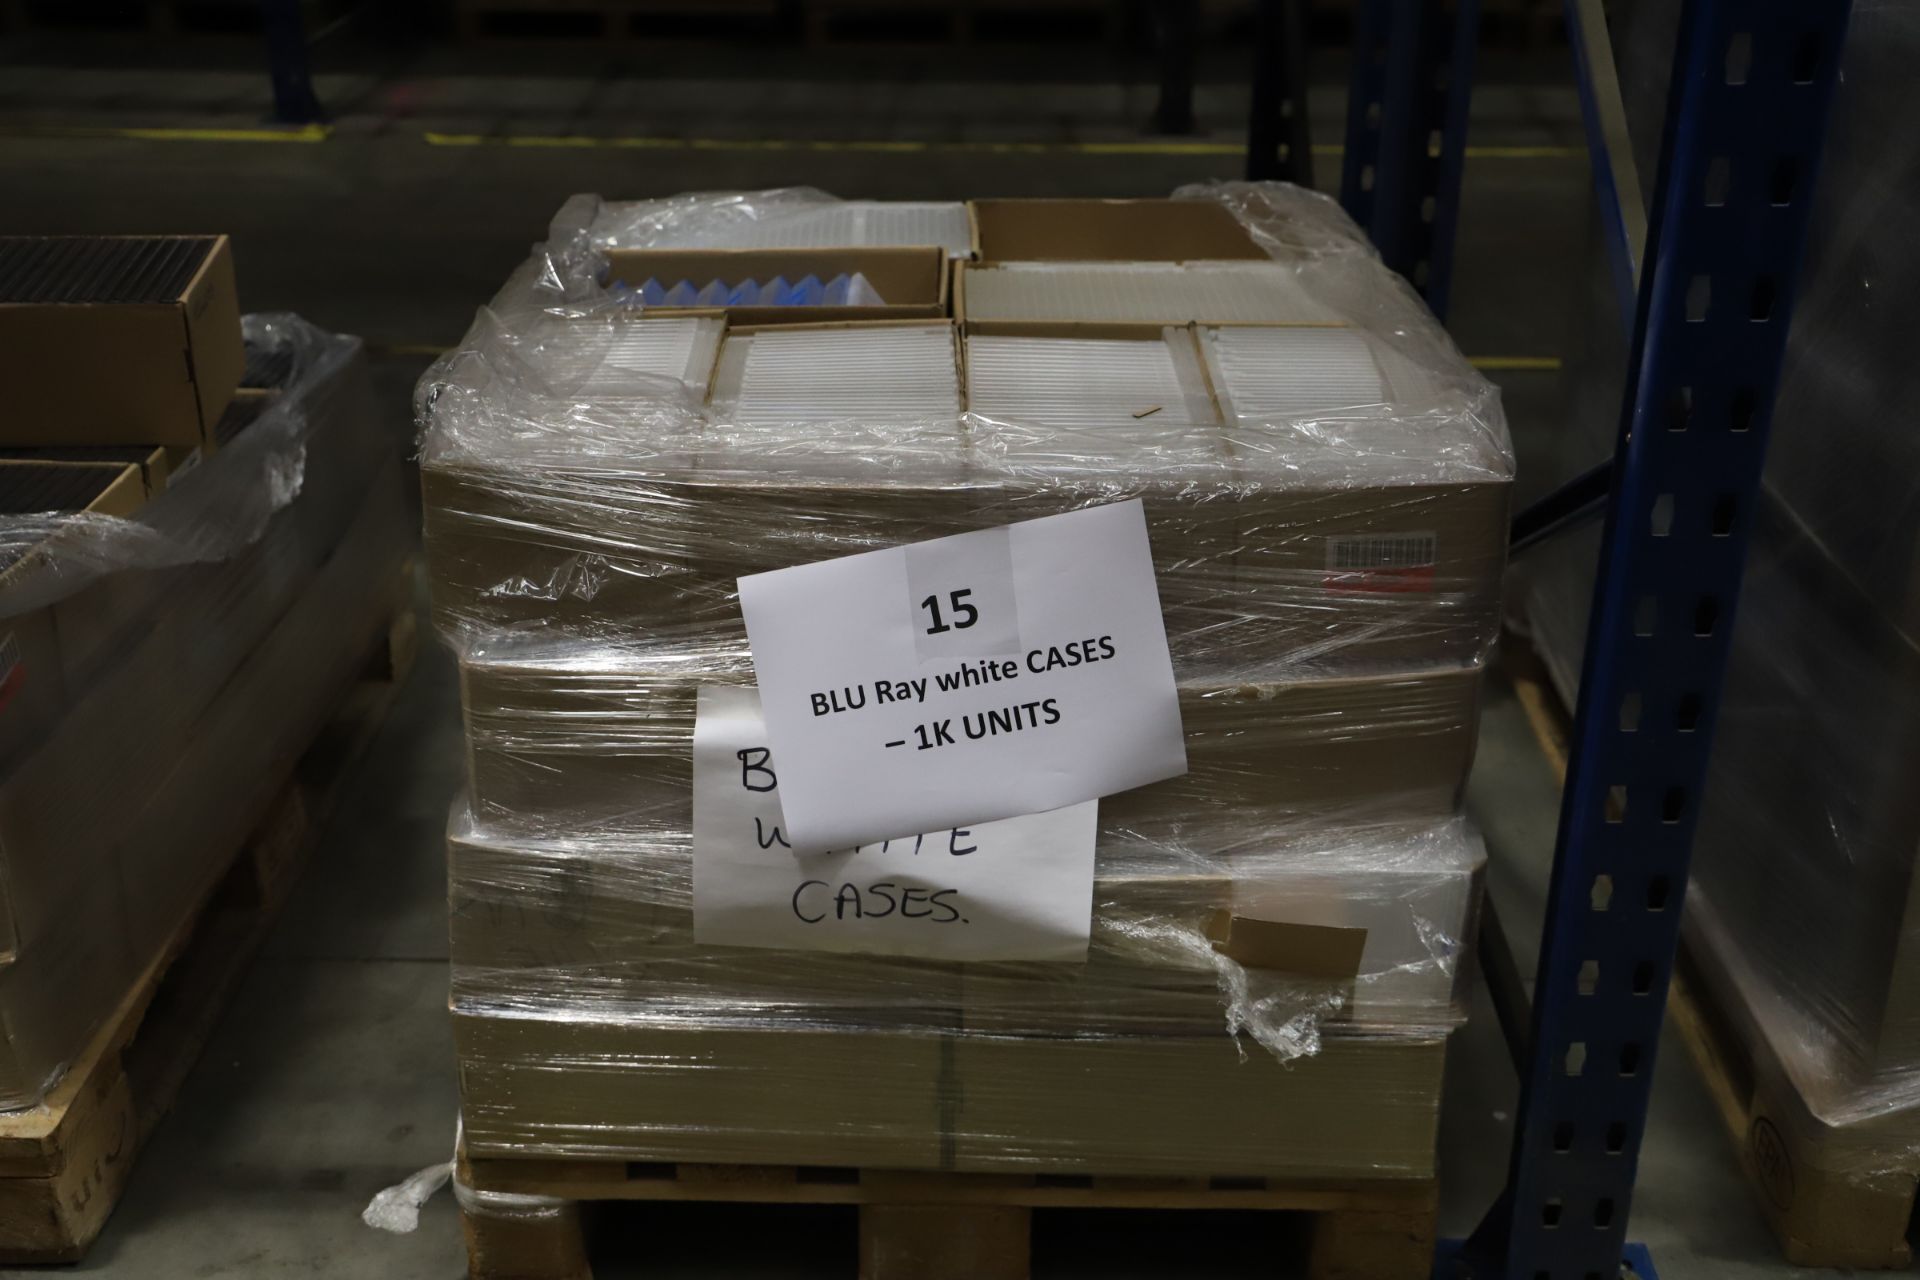 1 x Pallet of White Blu ray Cases